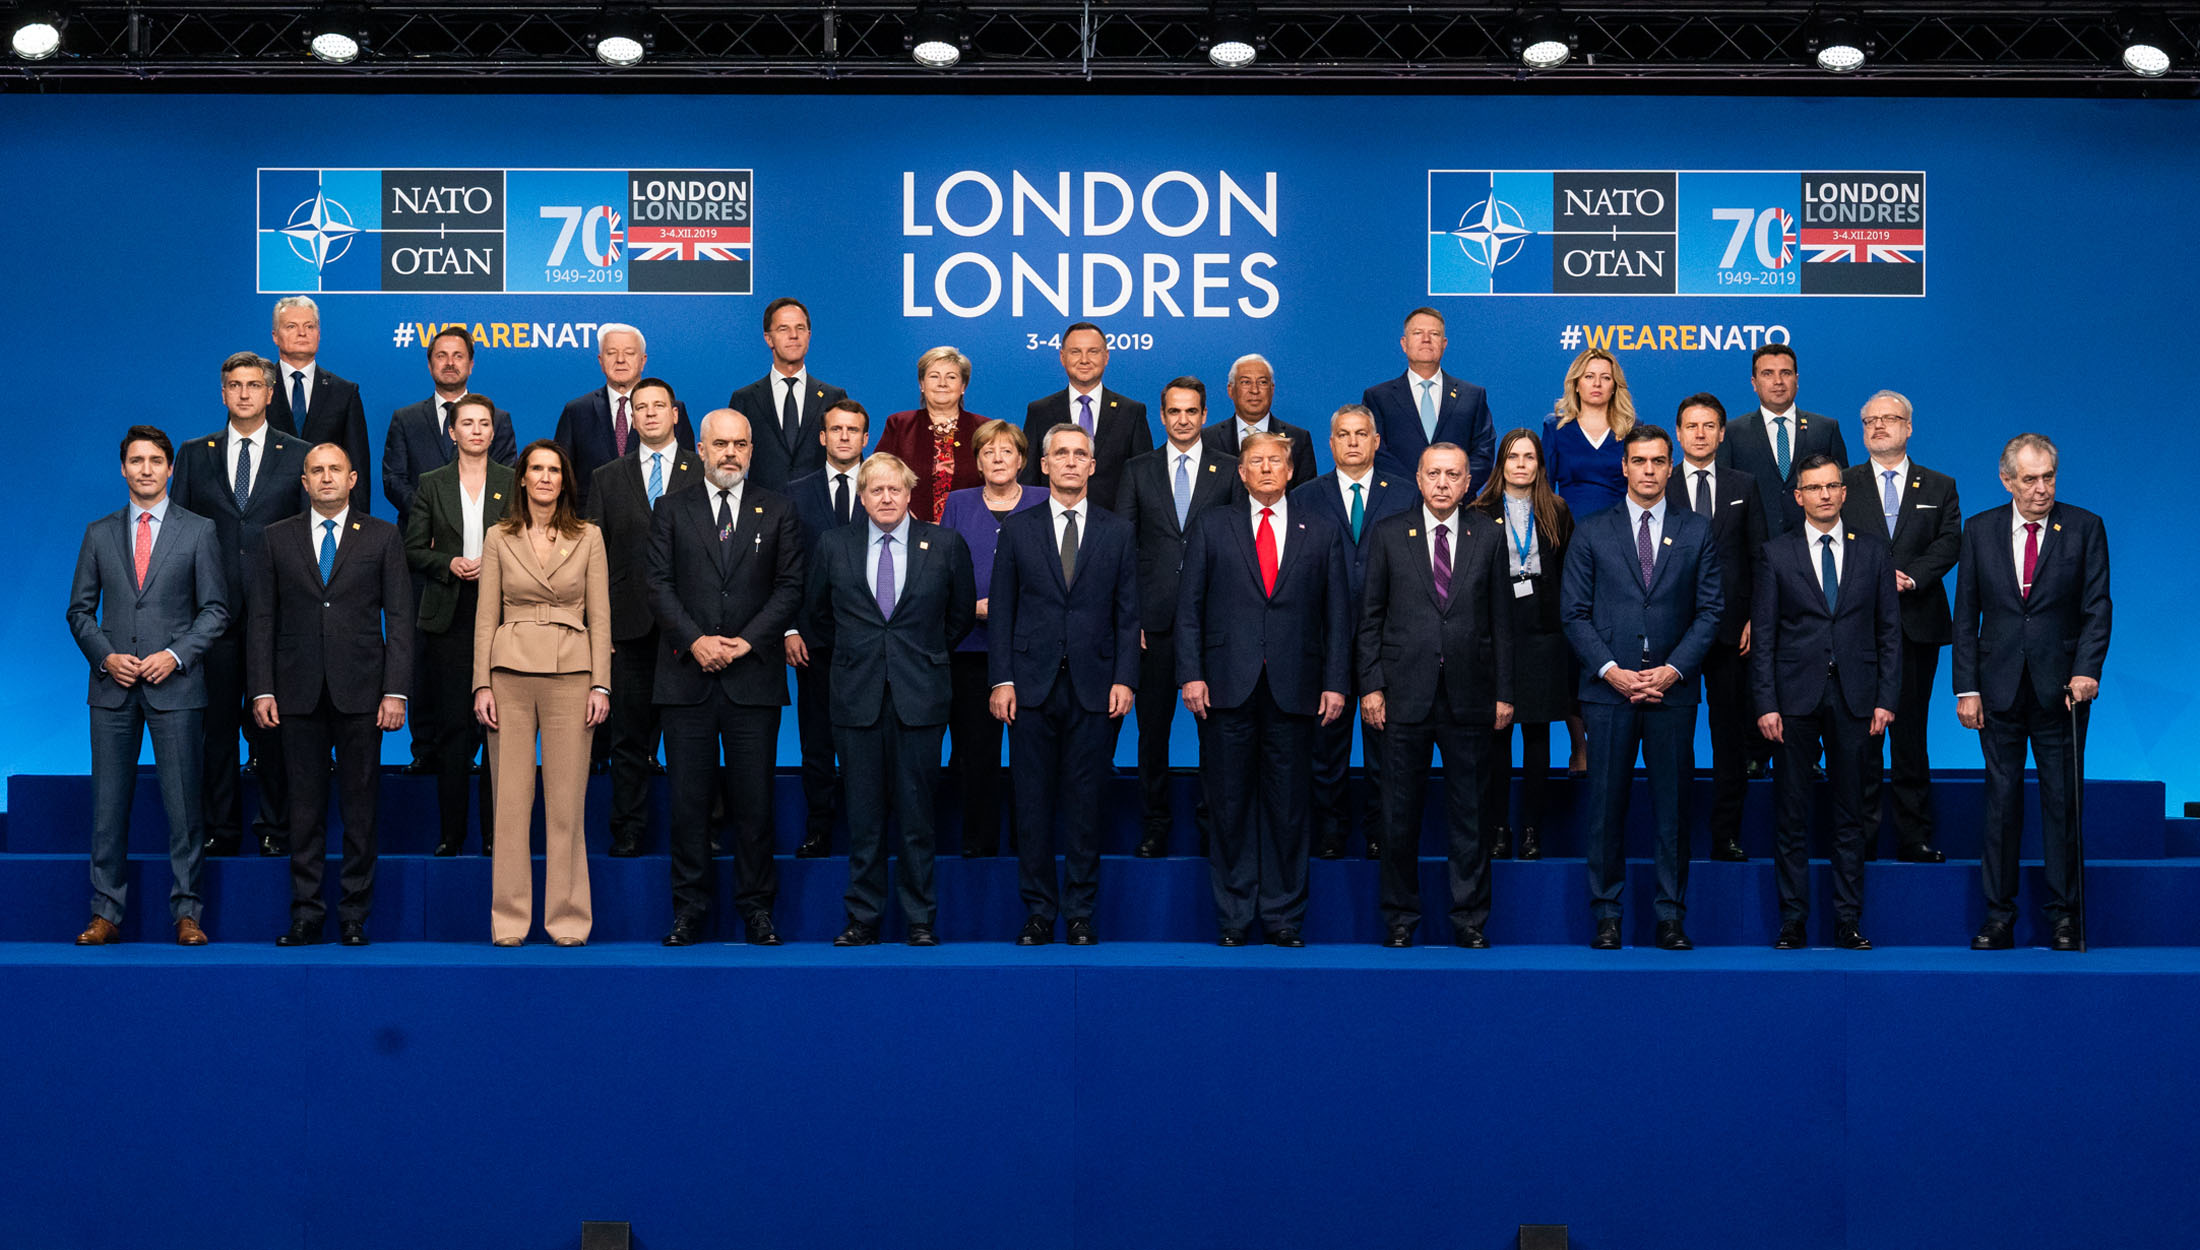 NATO Heads of state and government at the meeting in London